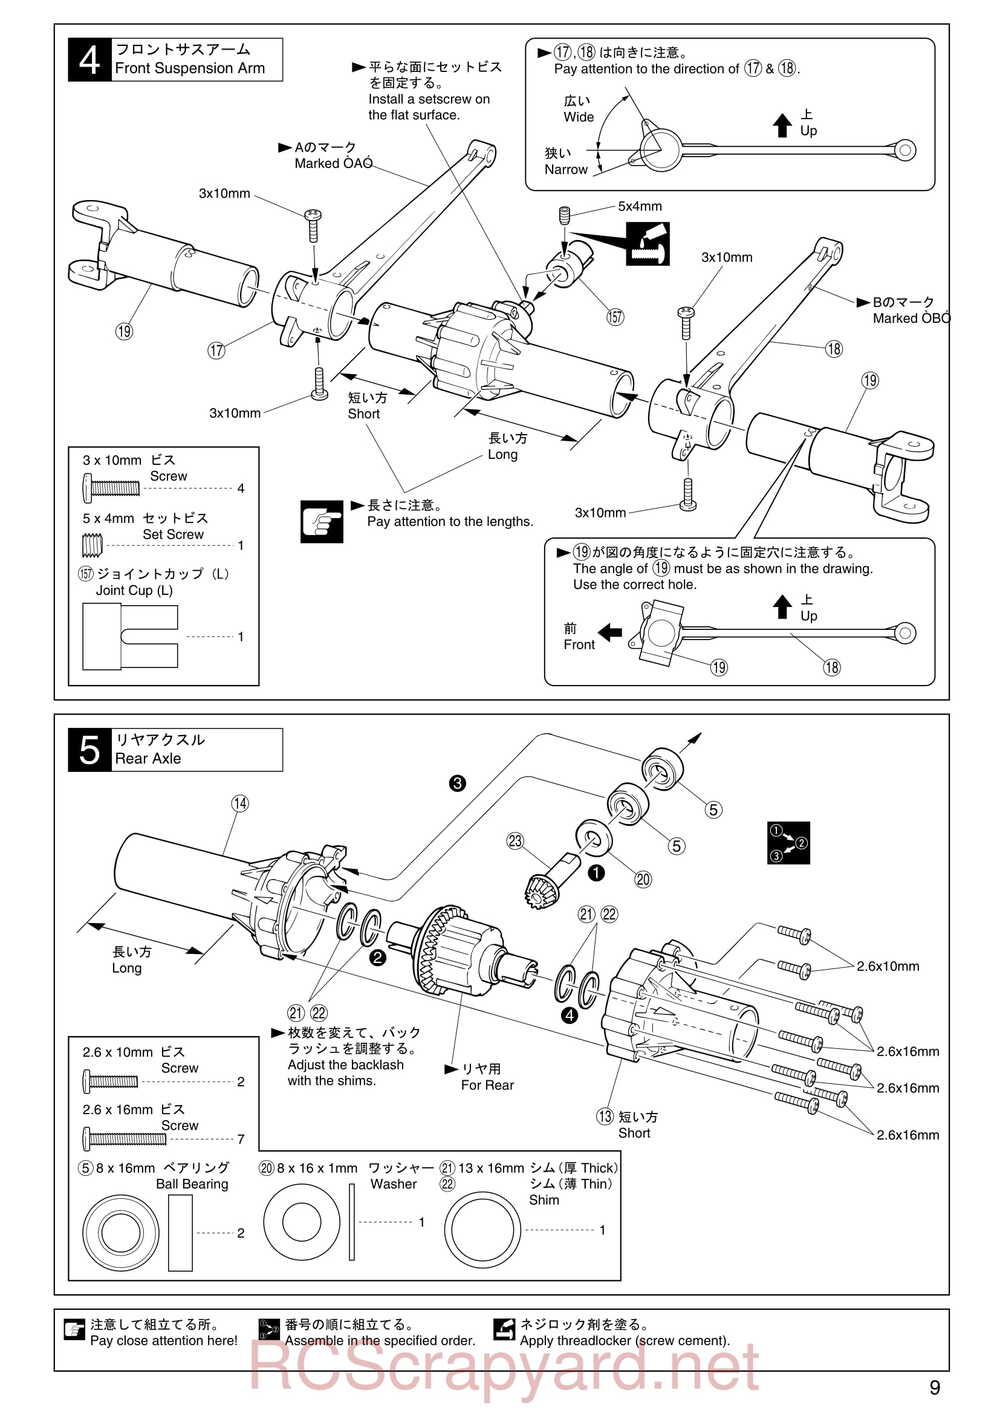 Kyosho - 31224 - Mad-Armour - Manual - Page 09